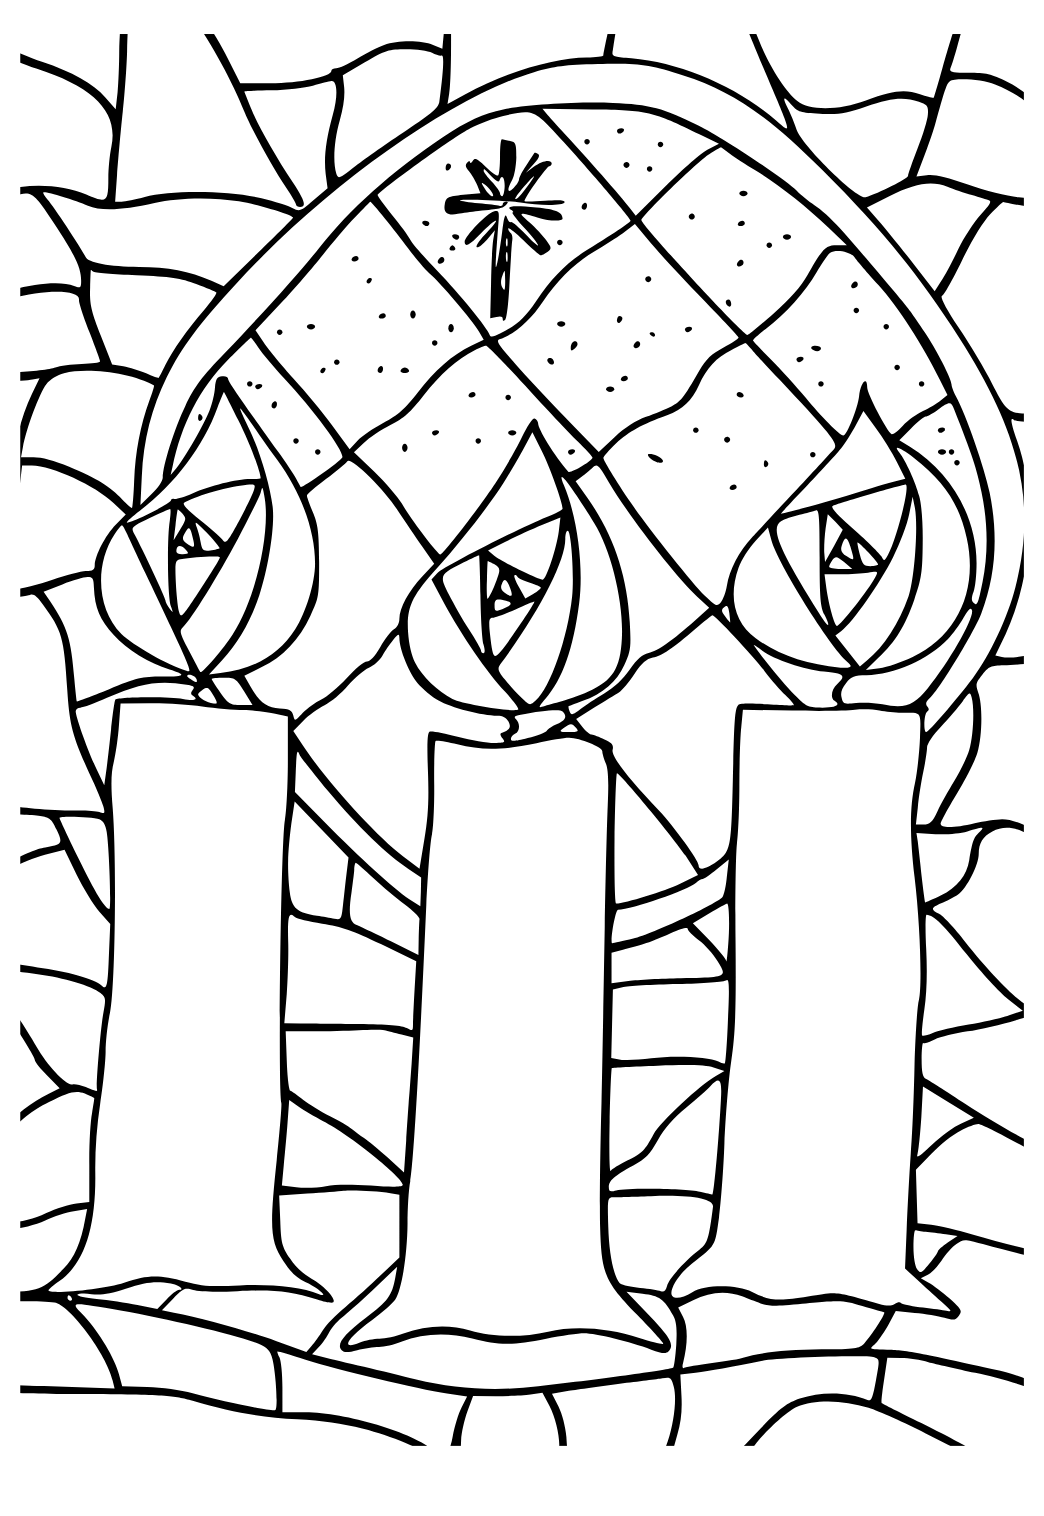 Free printable advent candles coloring page for adults and kids